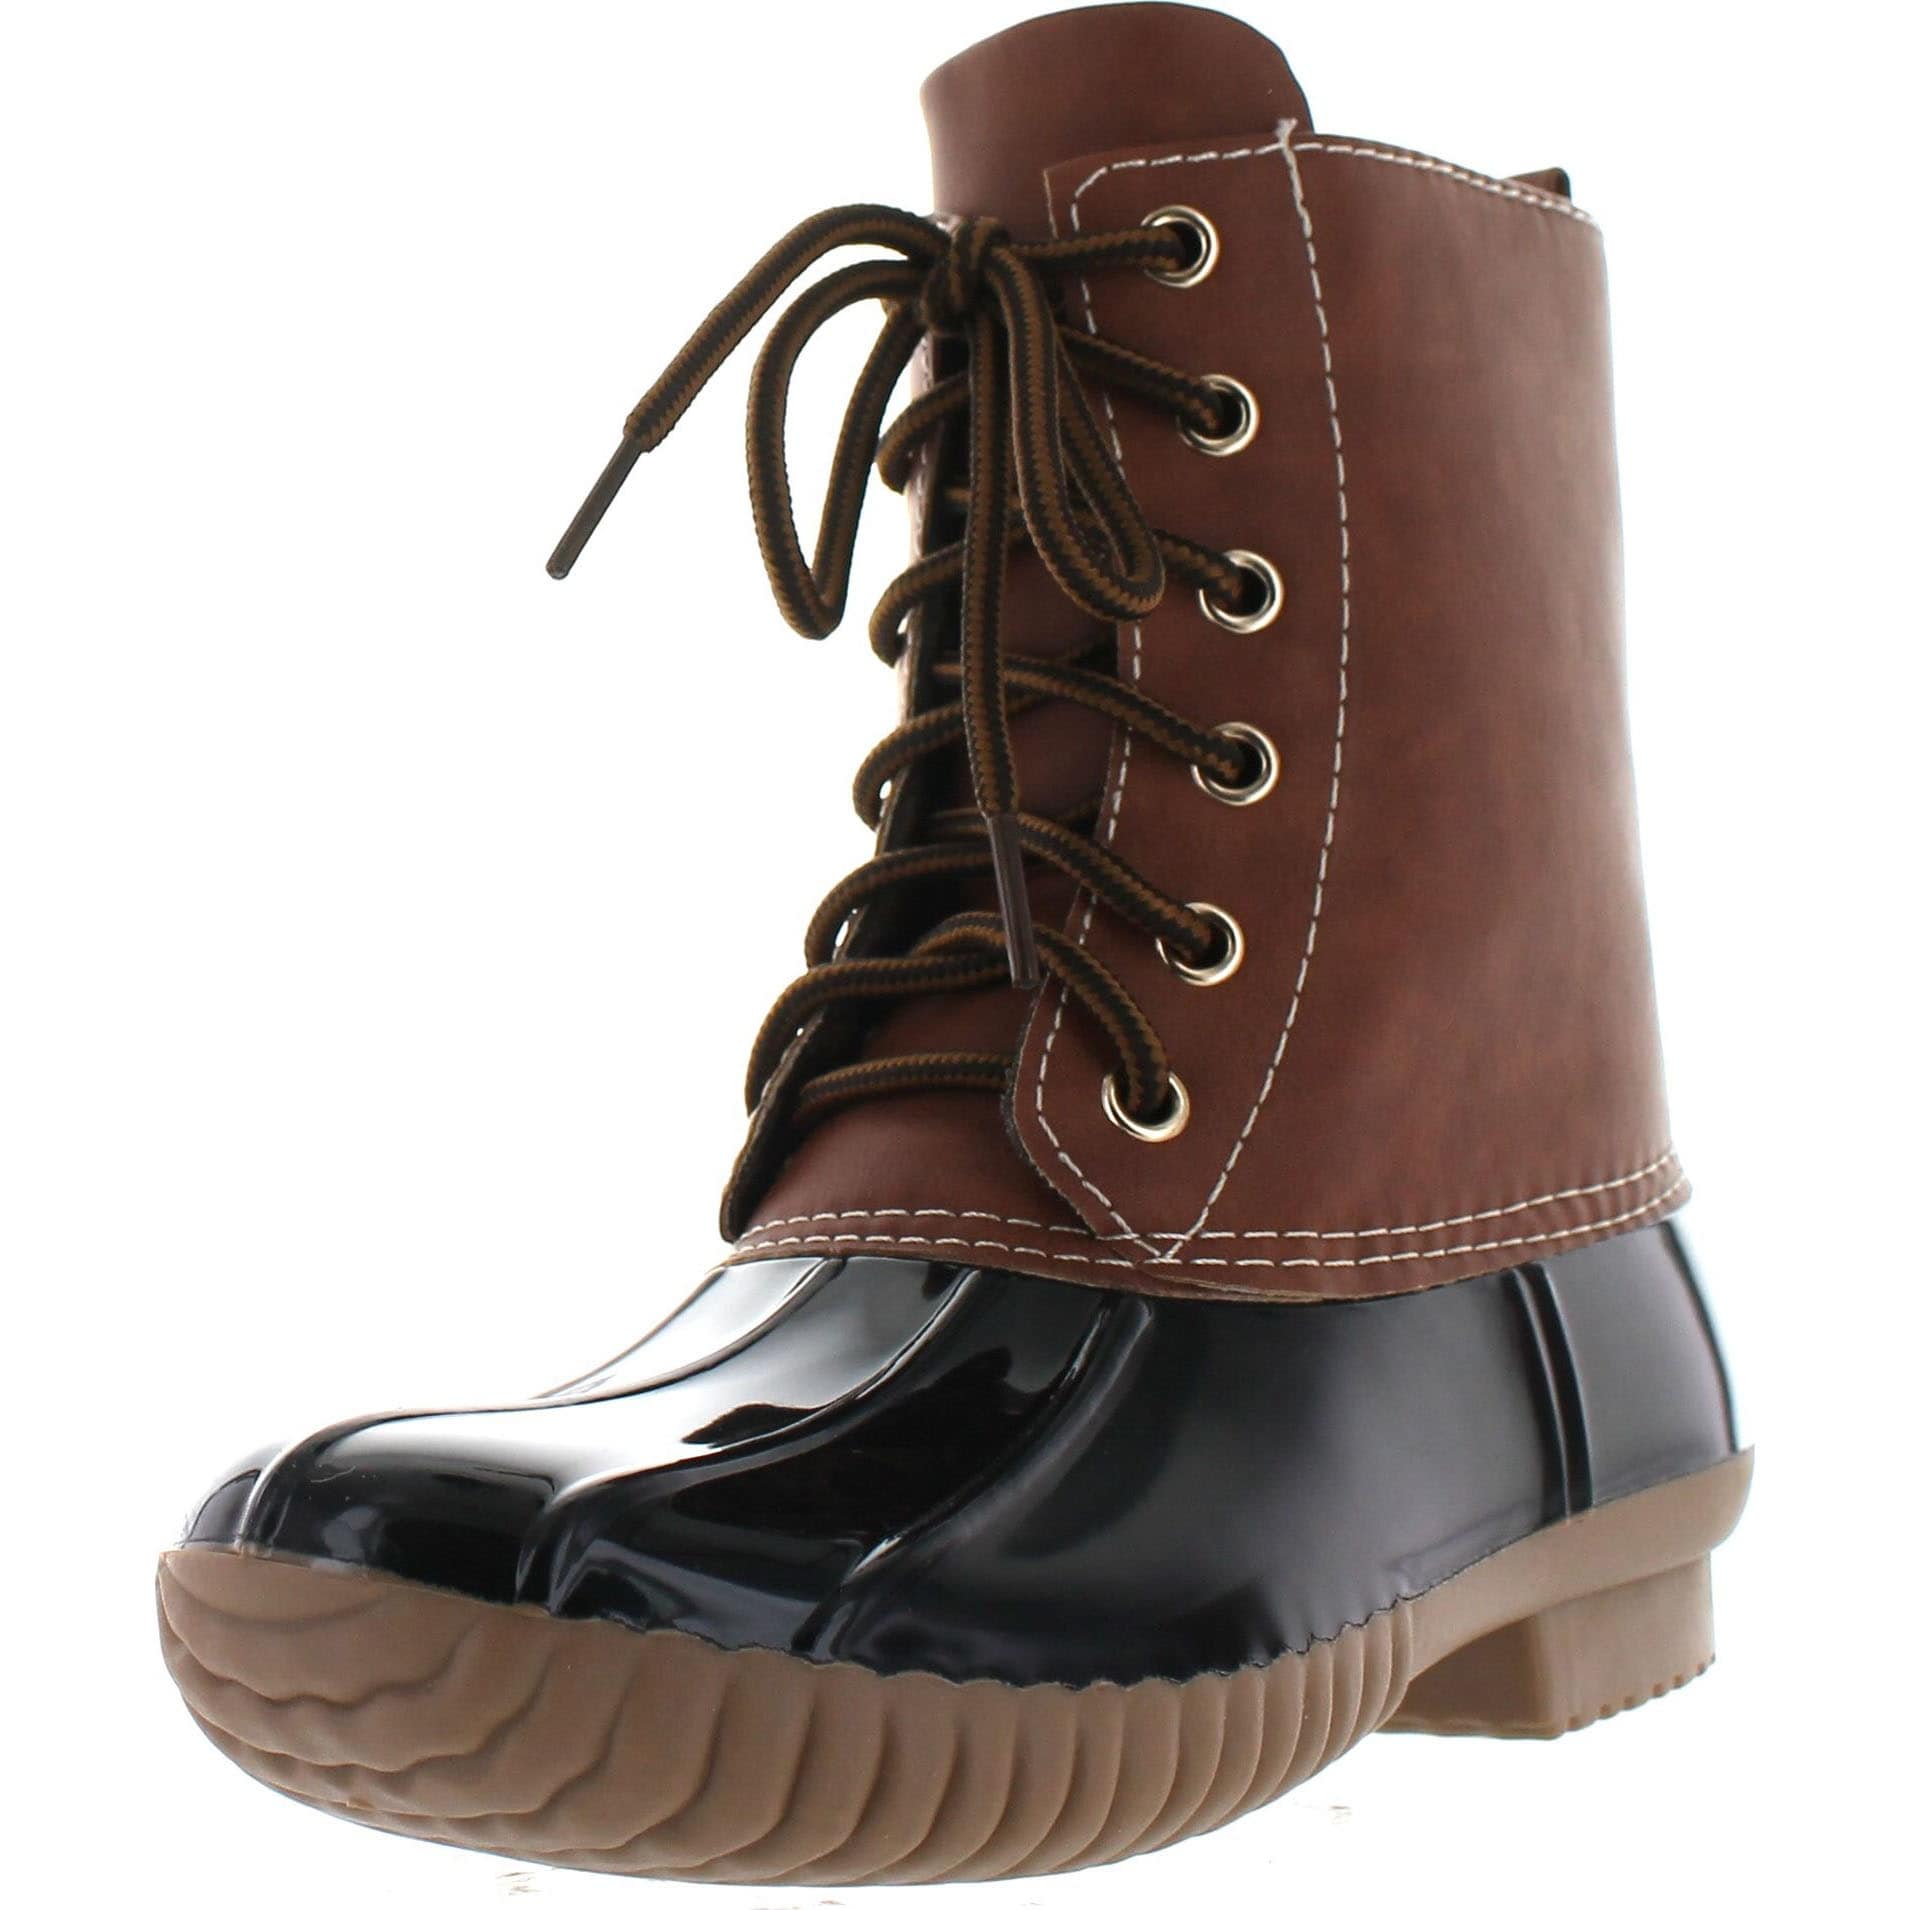 combat style boots